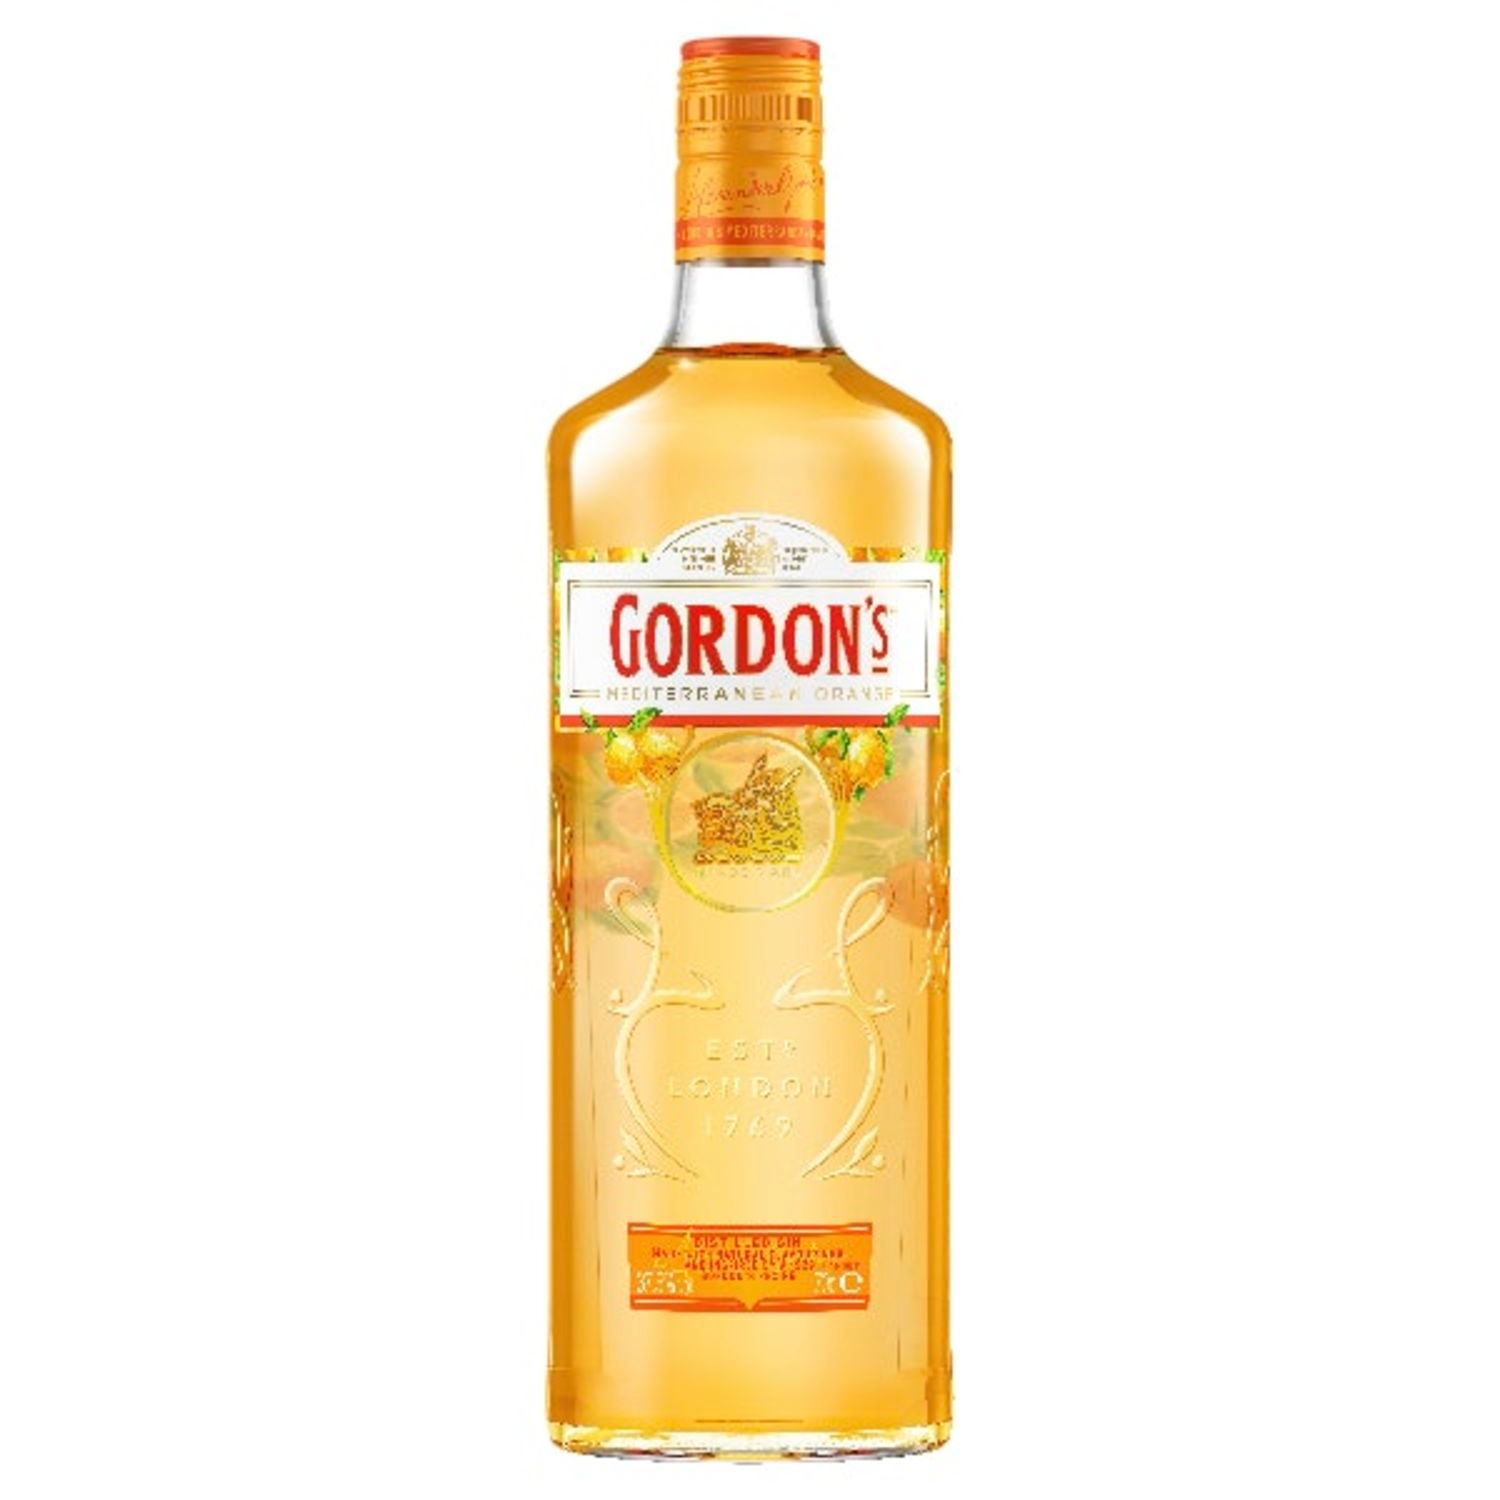 Inspired by a 1929 Gordon’s recipe. Made with the highest quality ingredients and using only natural flavours, it’s perfectly crafted to balance the juniper notes and refreshing taste of Gordon’s with a juicy & fresh Mediterranean orange taste. Perfect for social occasions with great food and great company.<br /> <br />Alcohol Volume: 37.50%<br /><br />Pack Format: Bottle<br /><br />Standard Drinks: 21</br /><br />Pack Type: Bottle<br /><br />Country of Origin: United Kingdom<br />